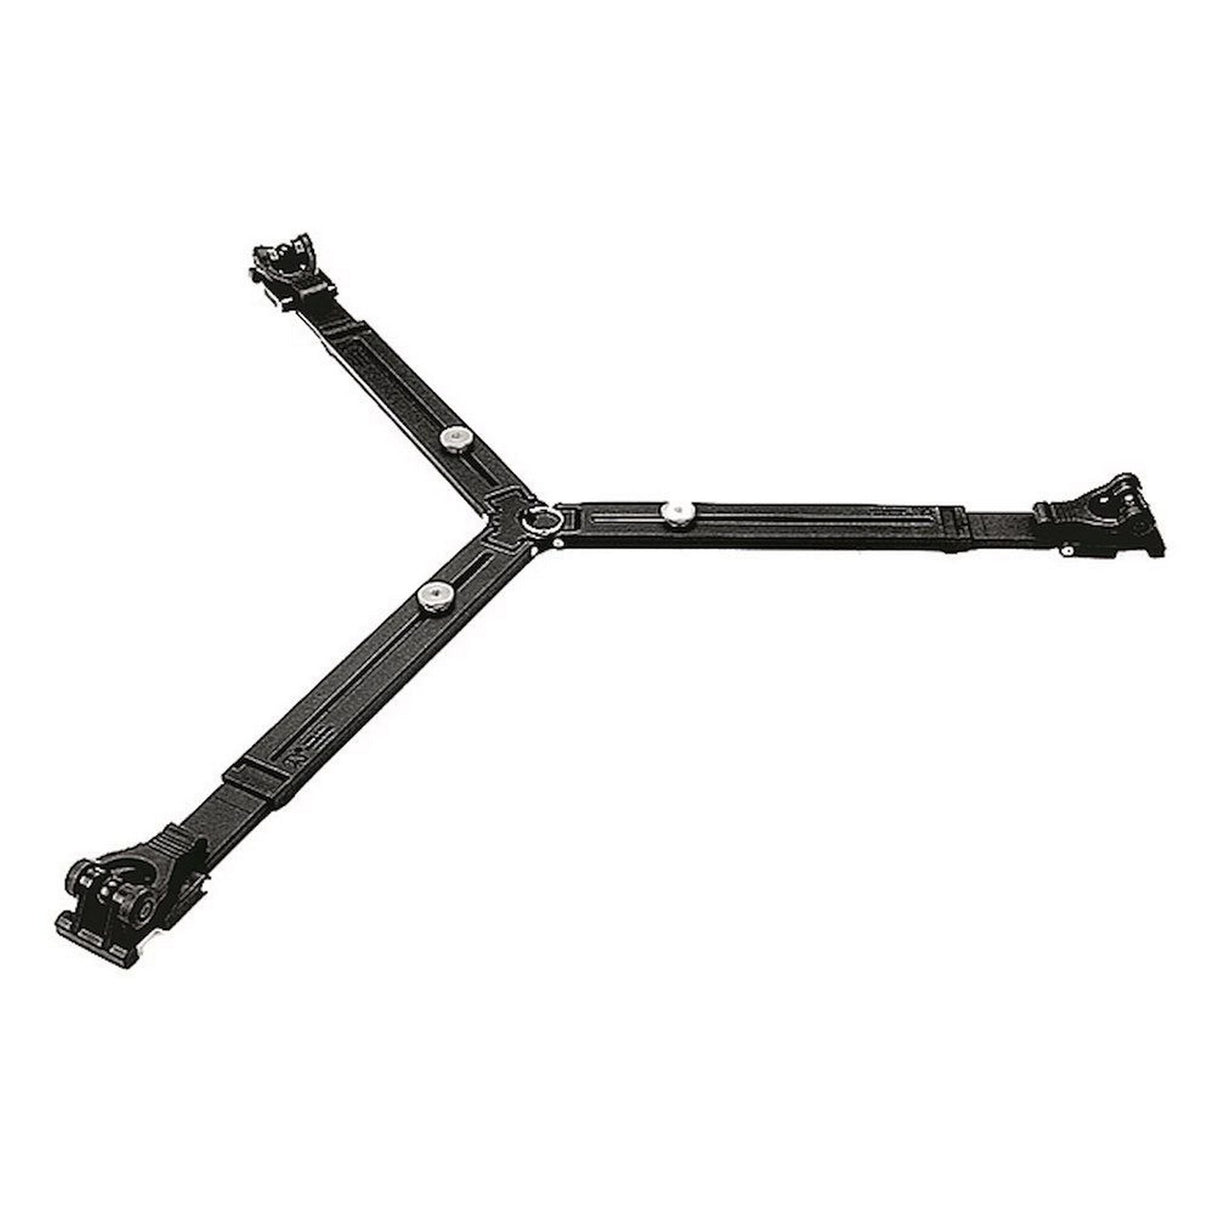 Manfrotto 165MV Tripod Spreader, Spiked